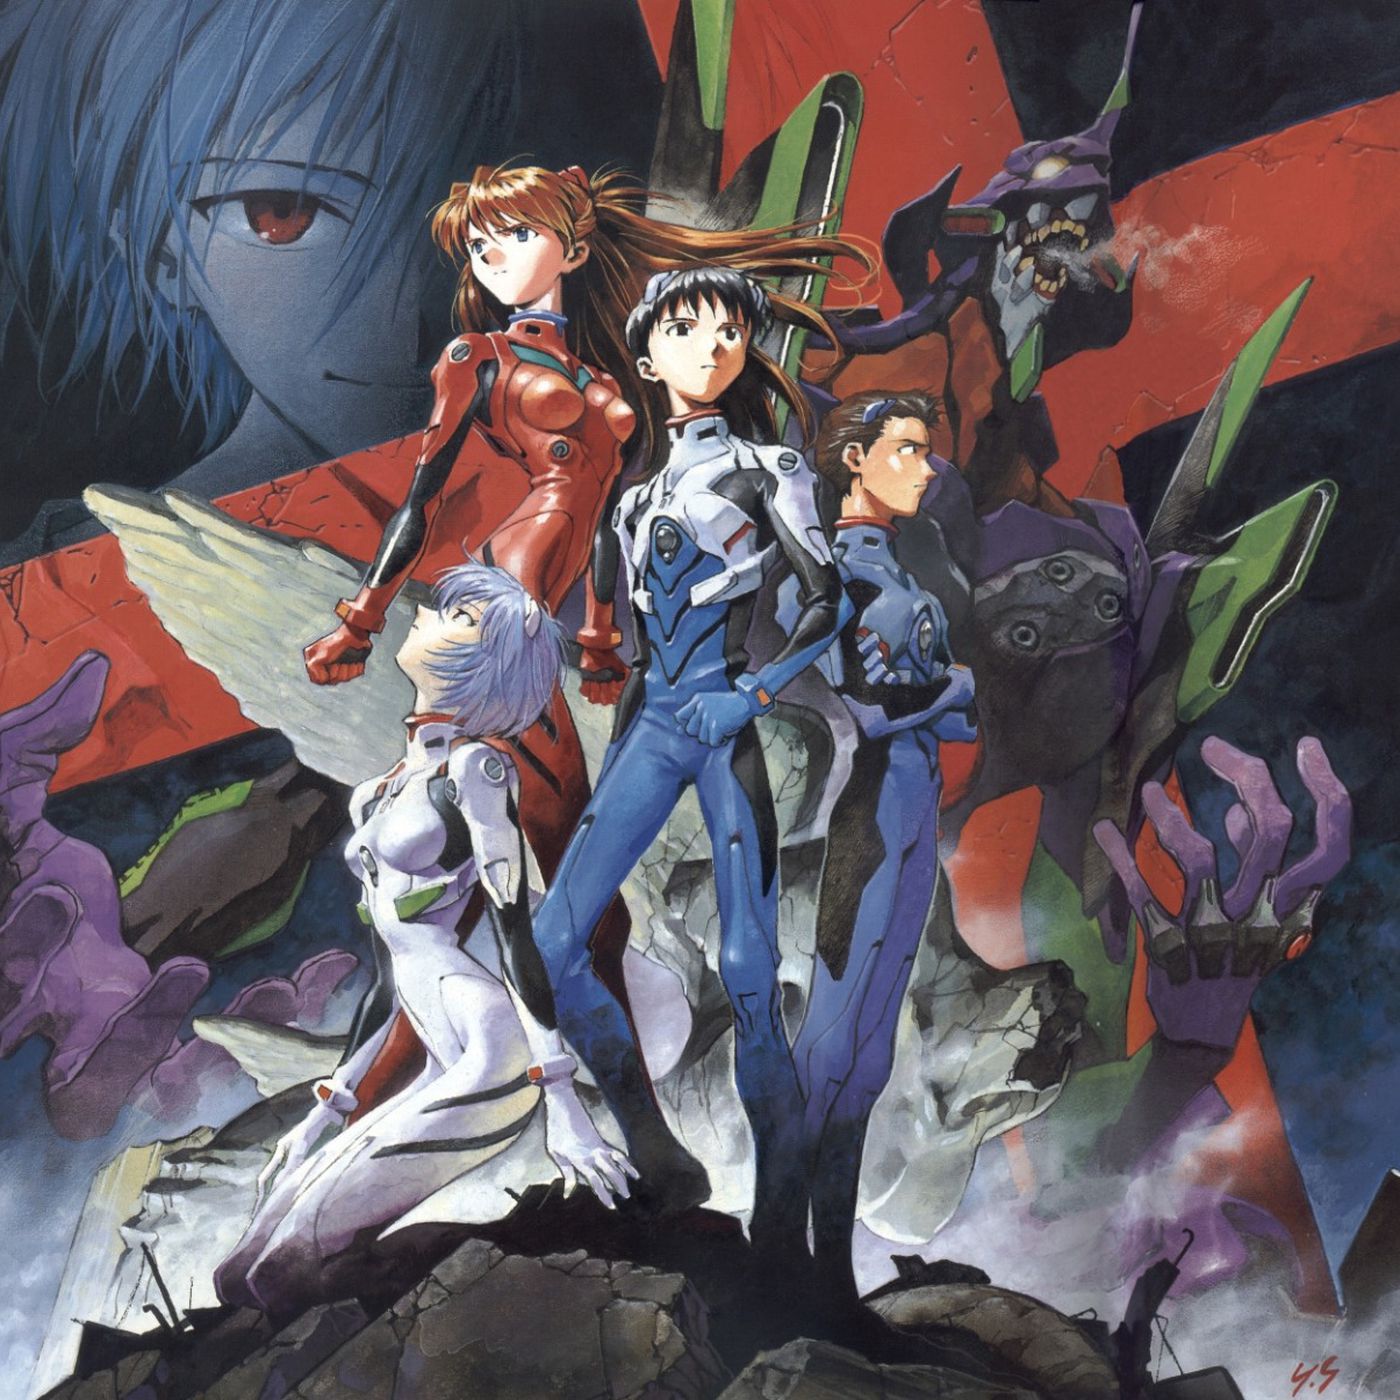 Neon Genesis Evangelion: 8 things to know about the legendary